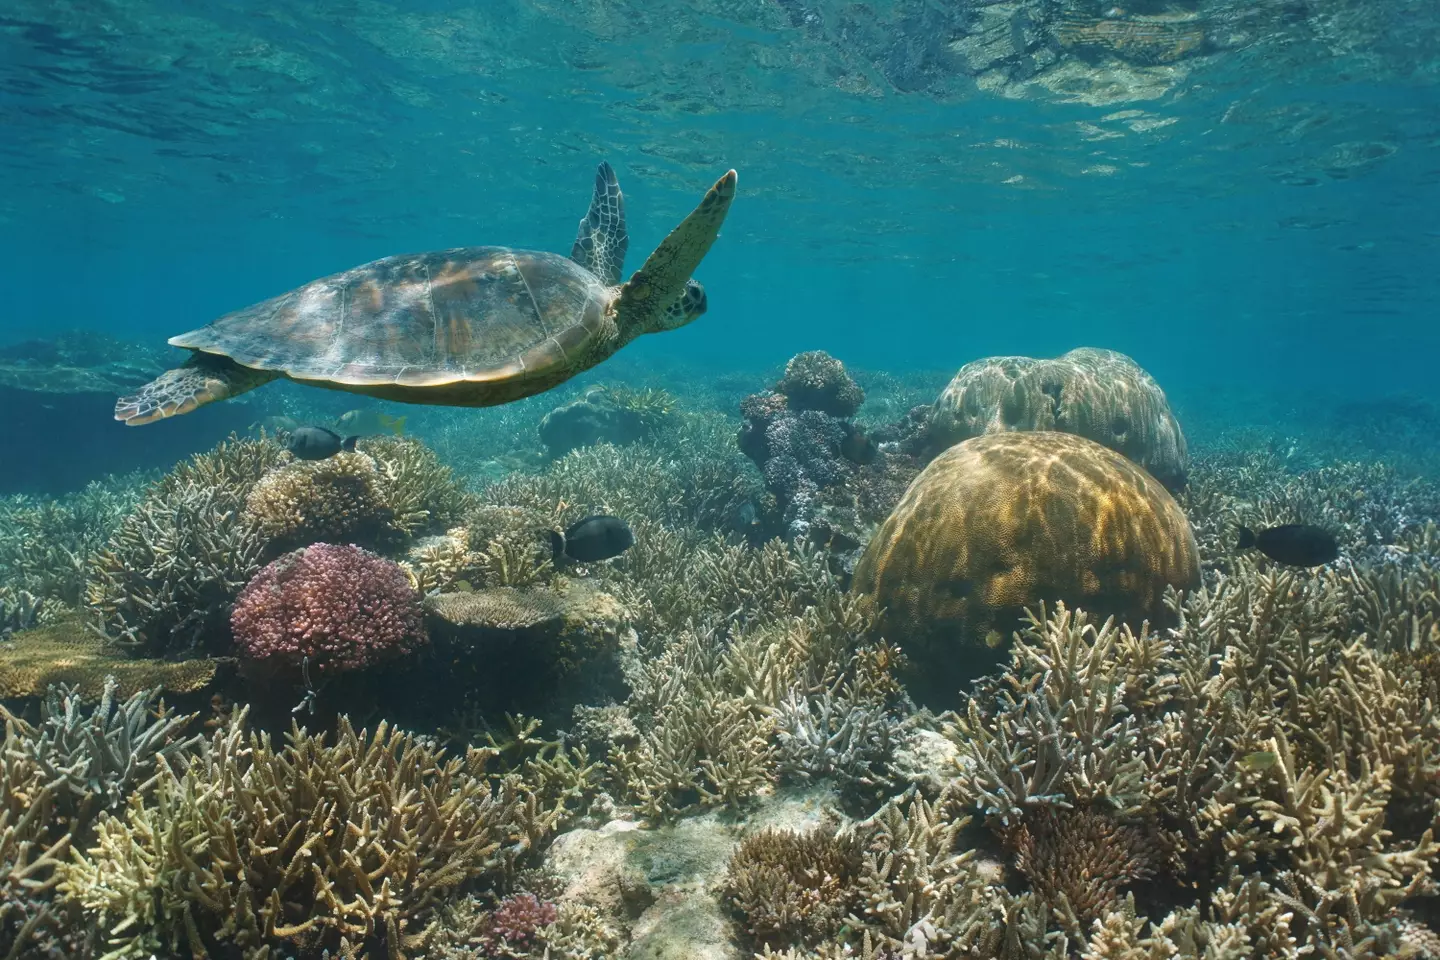 Scientists have predicted when a 'mass extinction' will happen in the ocean if we don’t do enough to curb harmful greenhouse gas emissions.